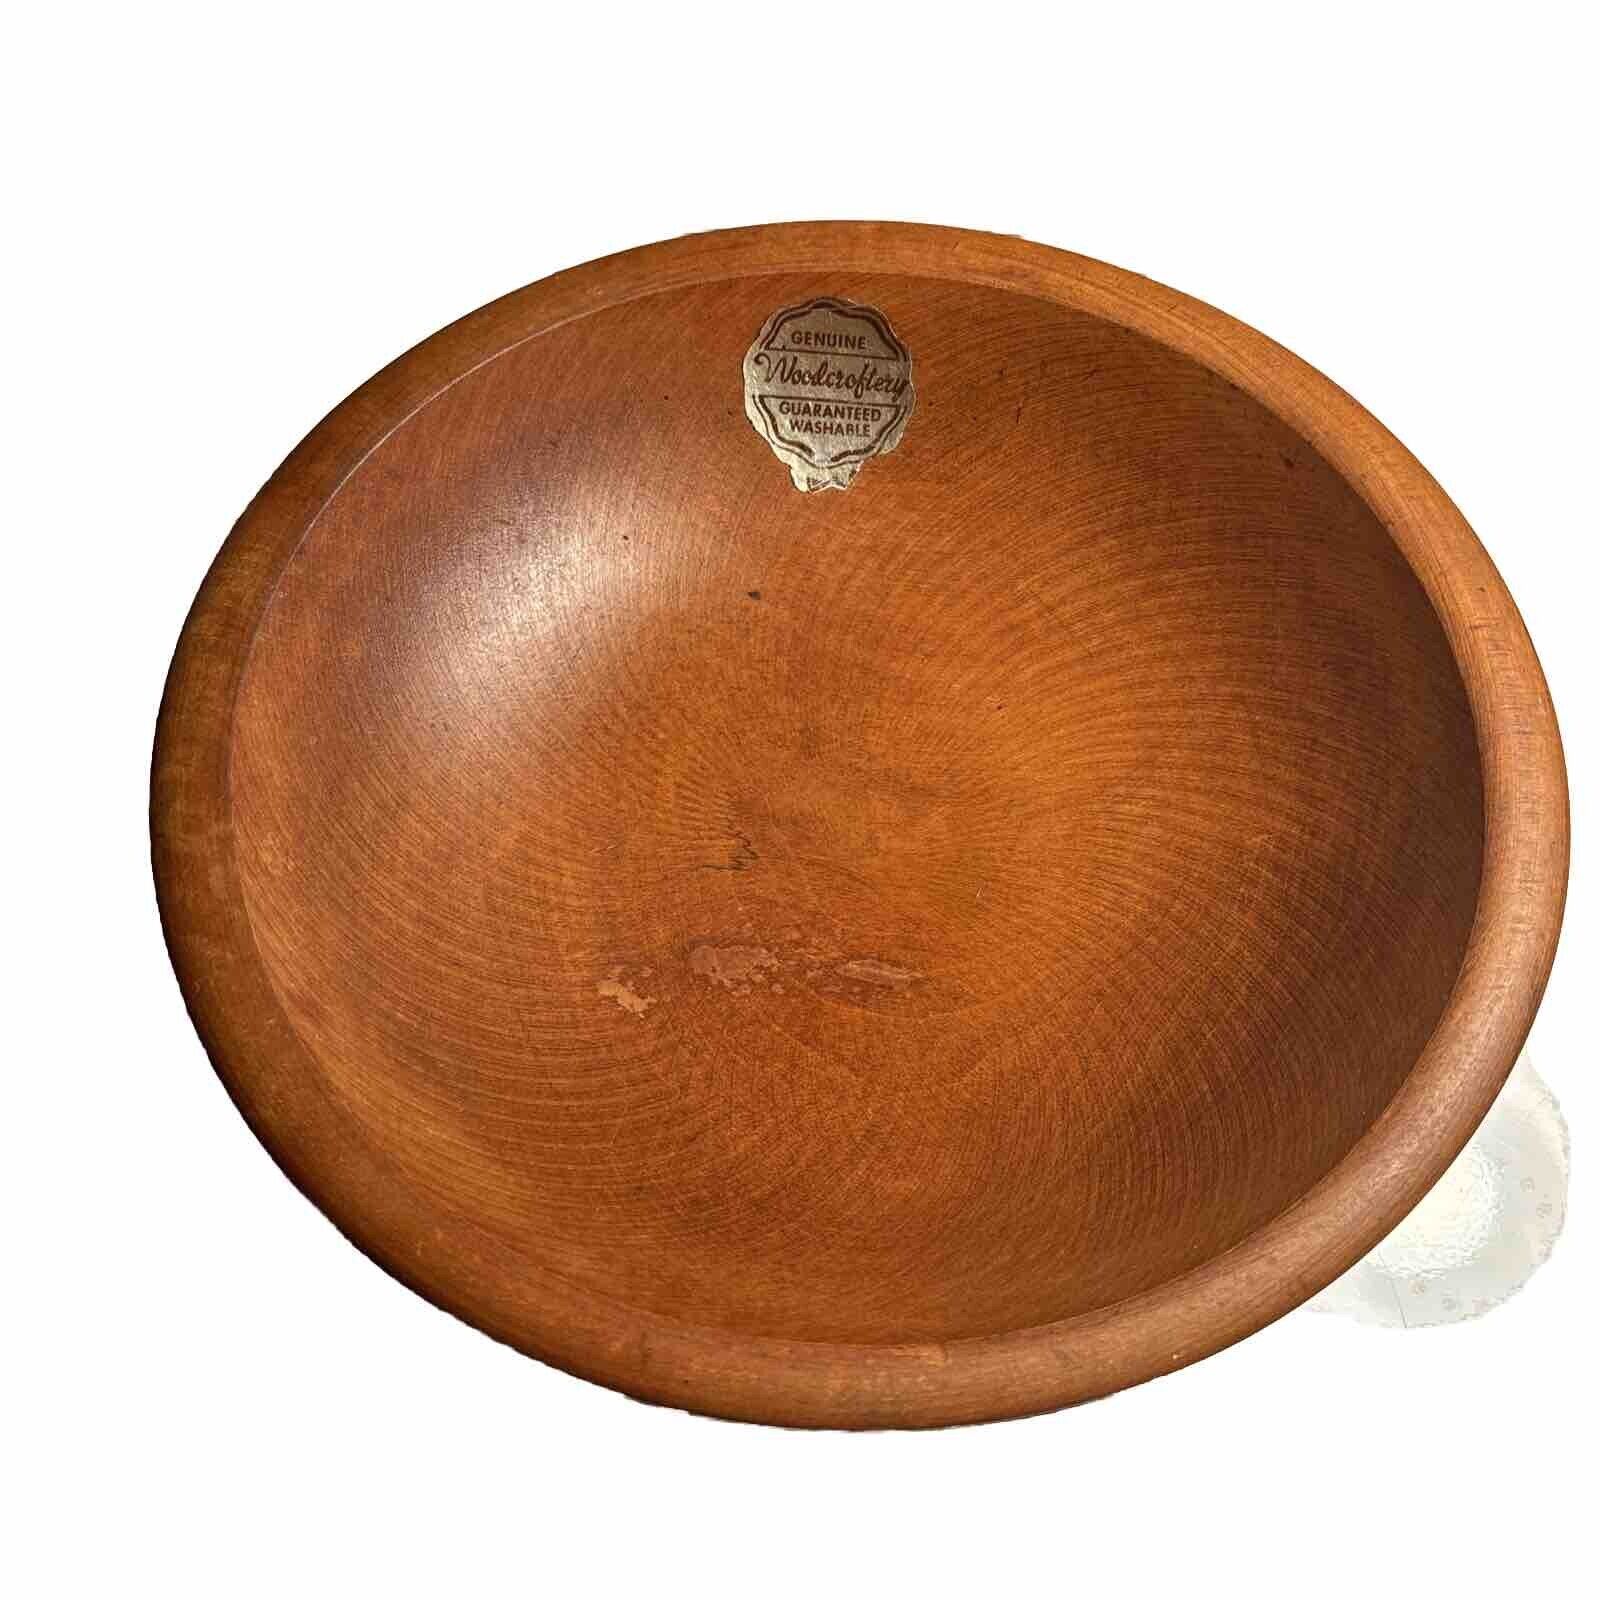 VINTAGE GENUINE WOODCRAFTERY PRODUCT WOODEN 9” BOWL